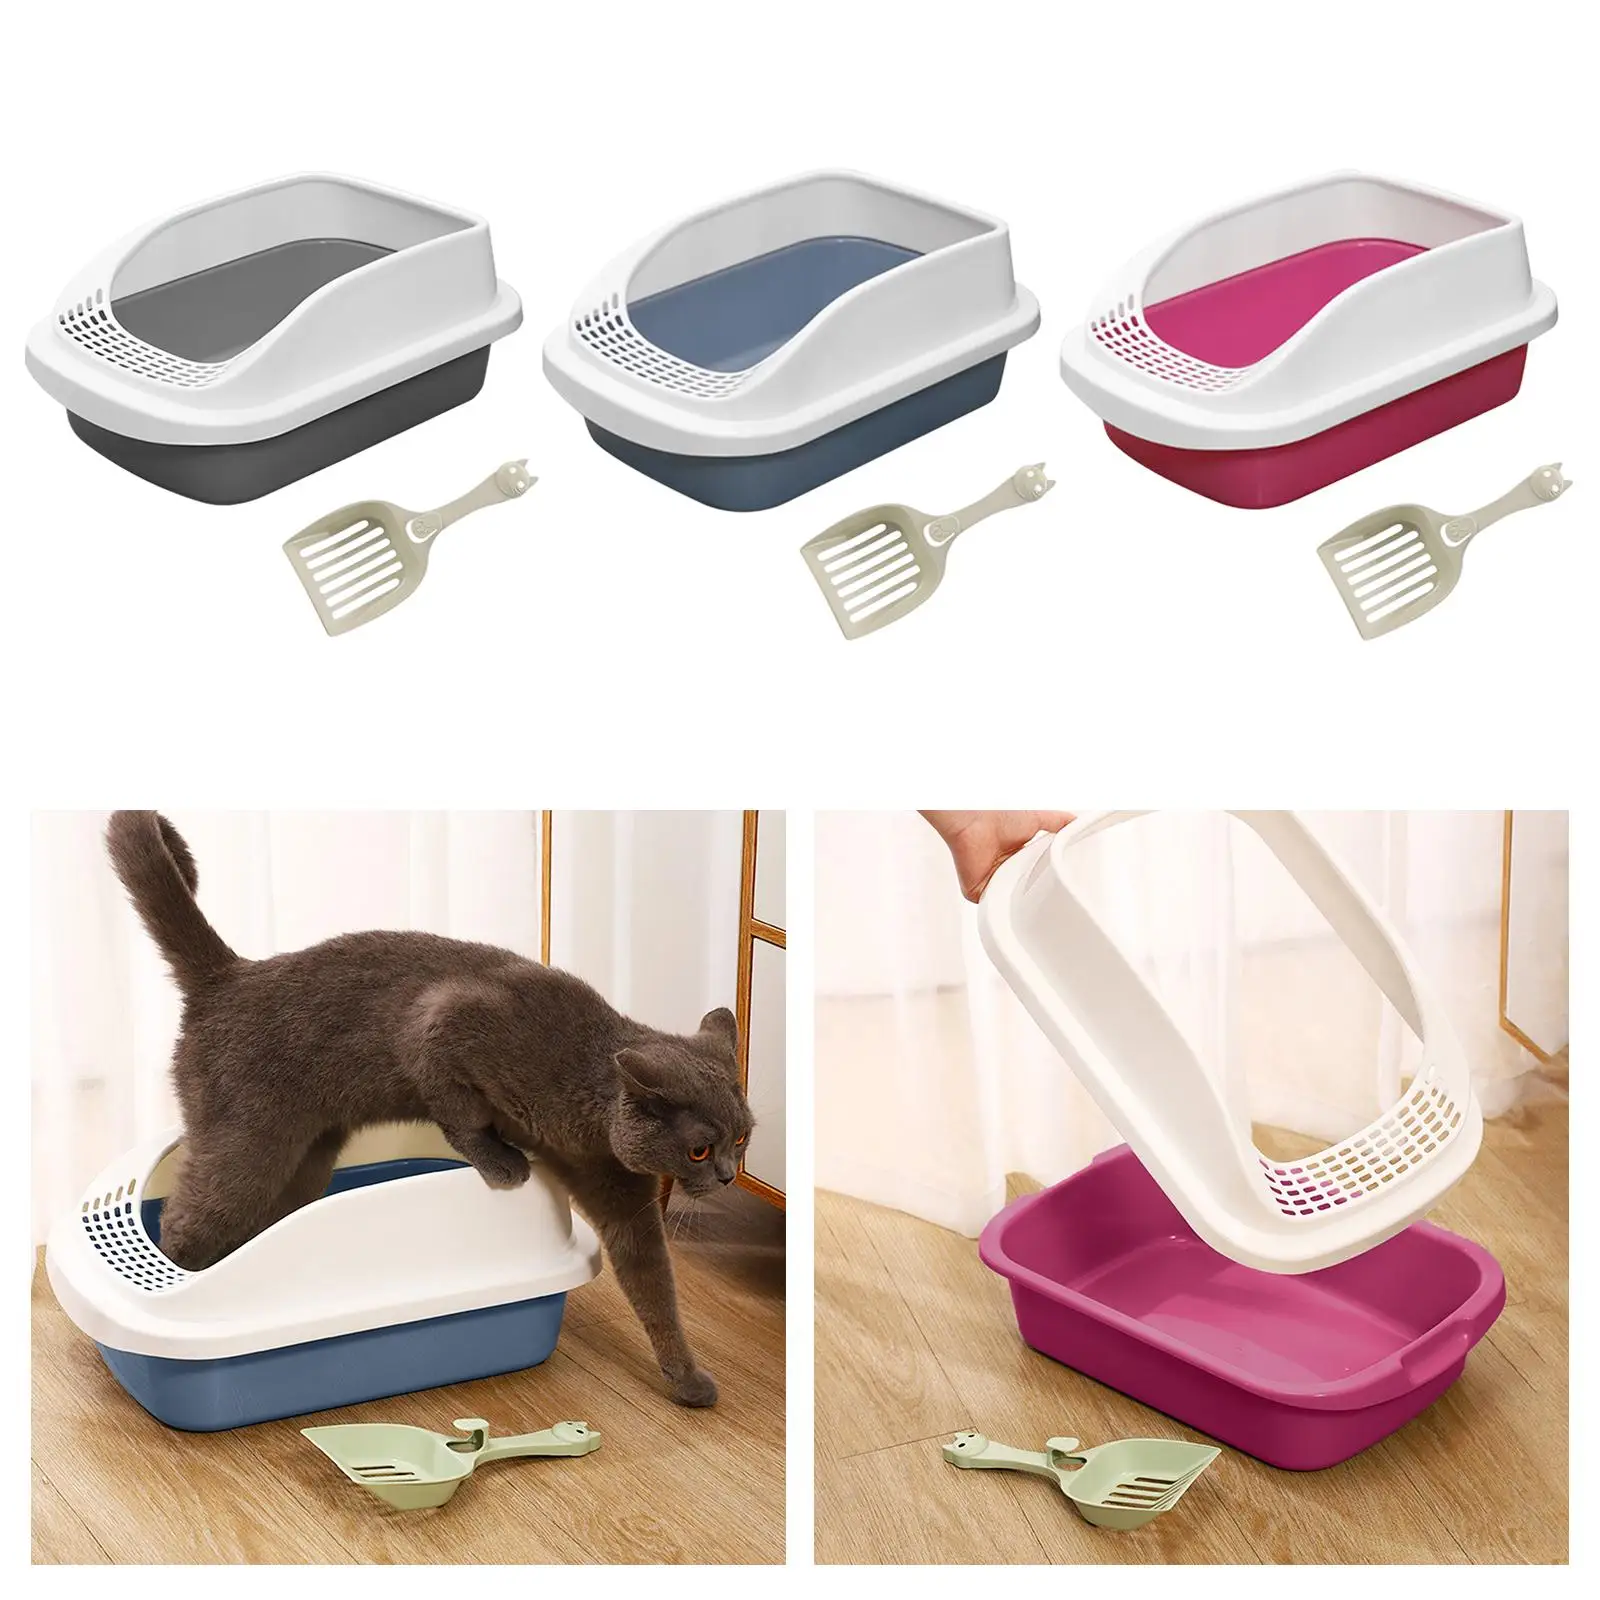 Litter Pan with Scoop Bedpan Cage Open Top Cat Litter Box Pets Litter Trays for Kitty Bunny Rabbit Kitten Small and Medium Cats